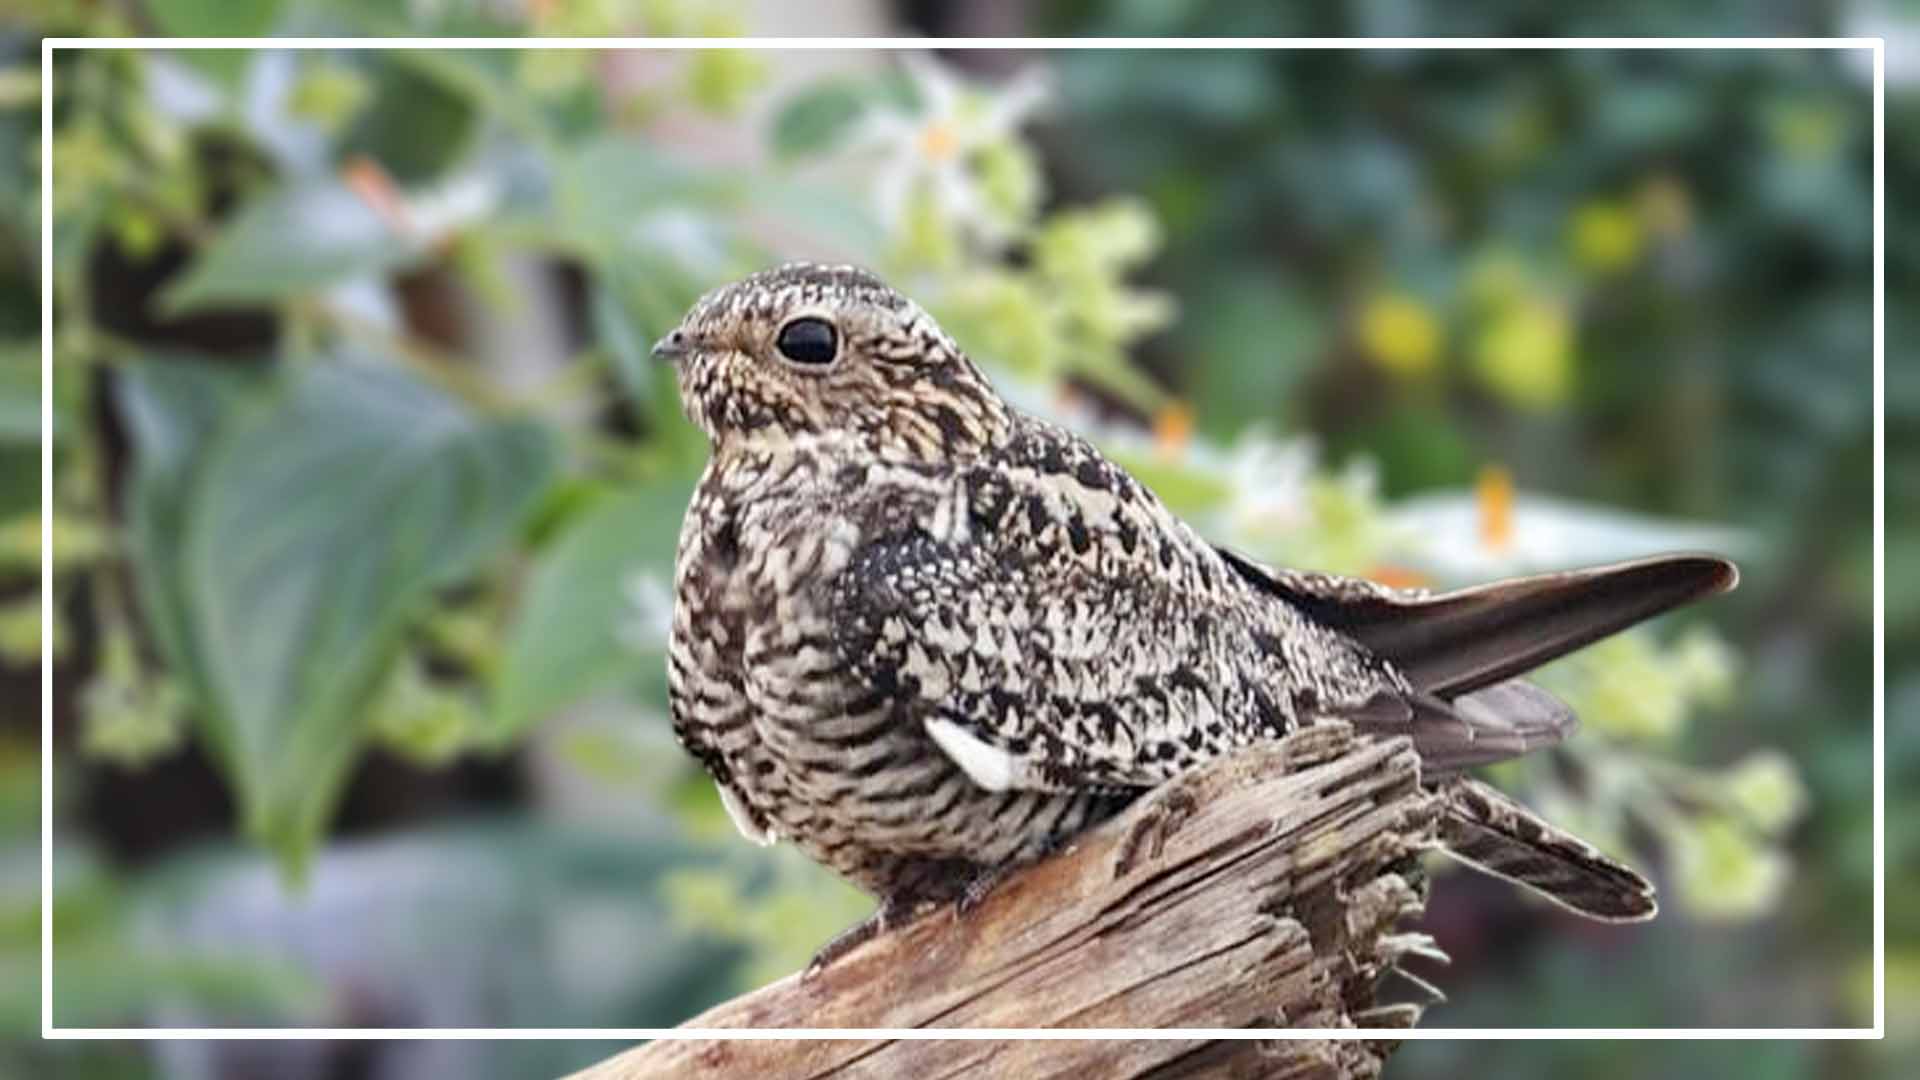 Common Nighthawk is a Brown Bird with White Stripes on Wings and Tail